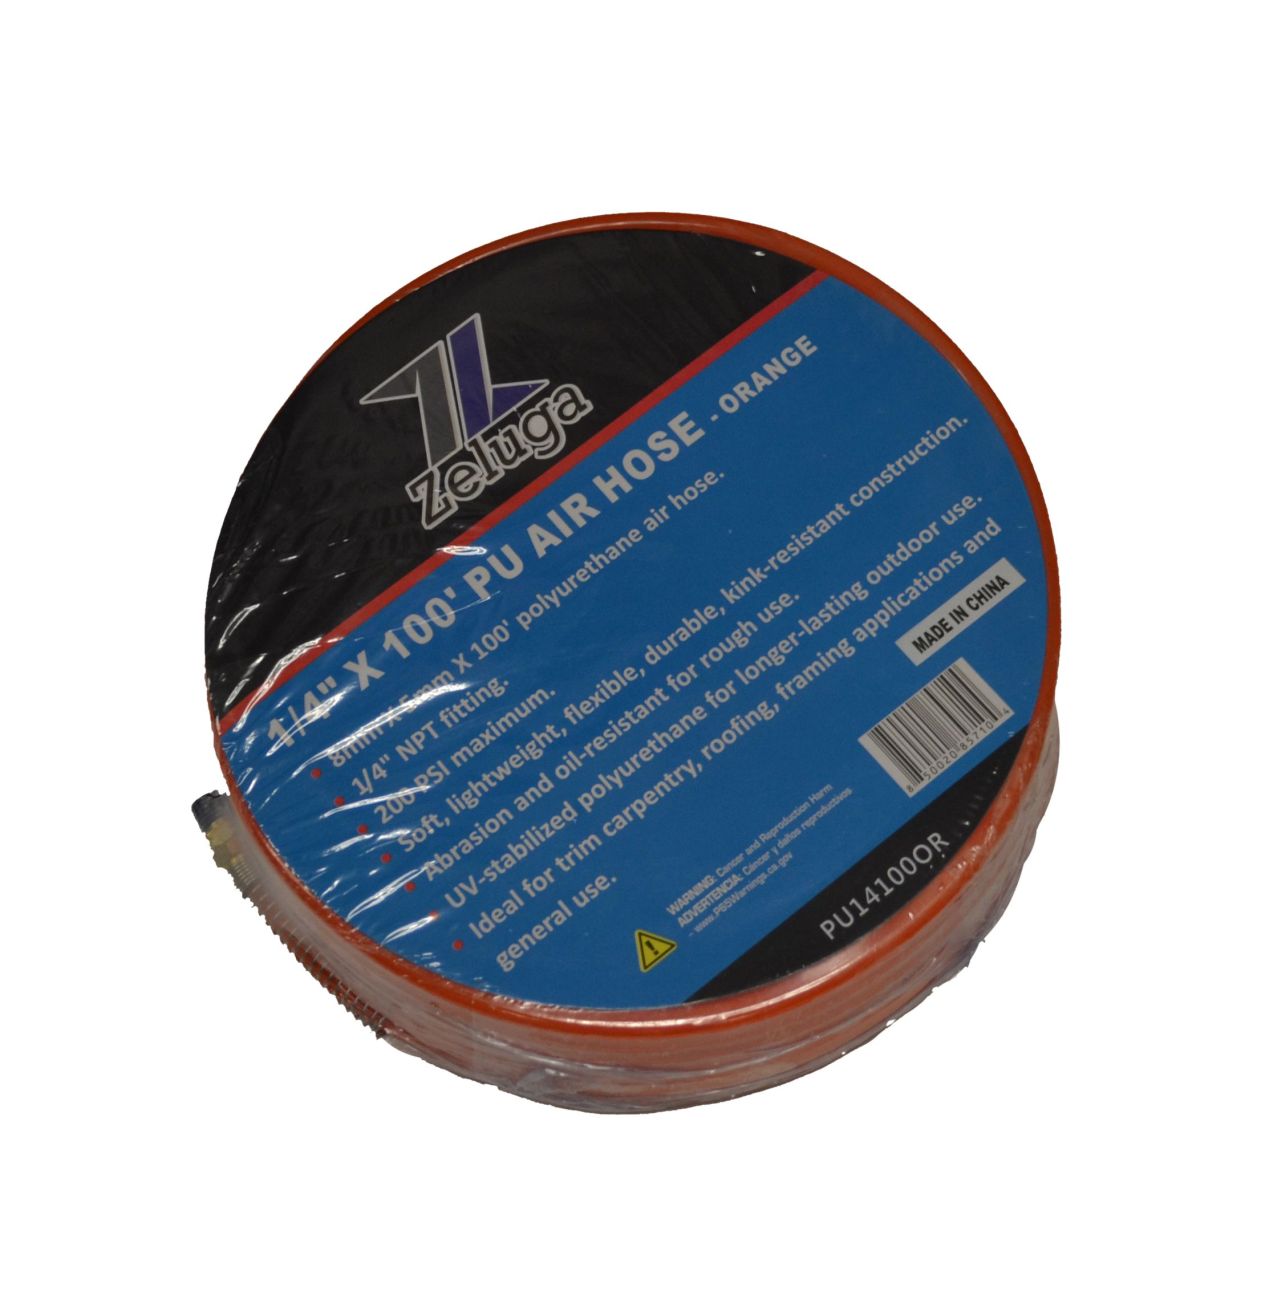 PU14100OR 1/4in. x 100ft. Polyurethane Non-Transparent and Without Wire Reinforced Air Hose, Orange